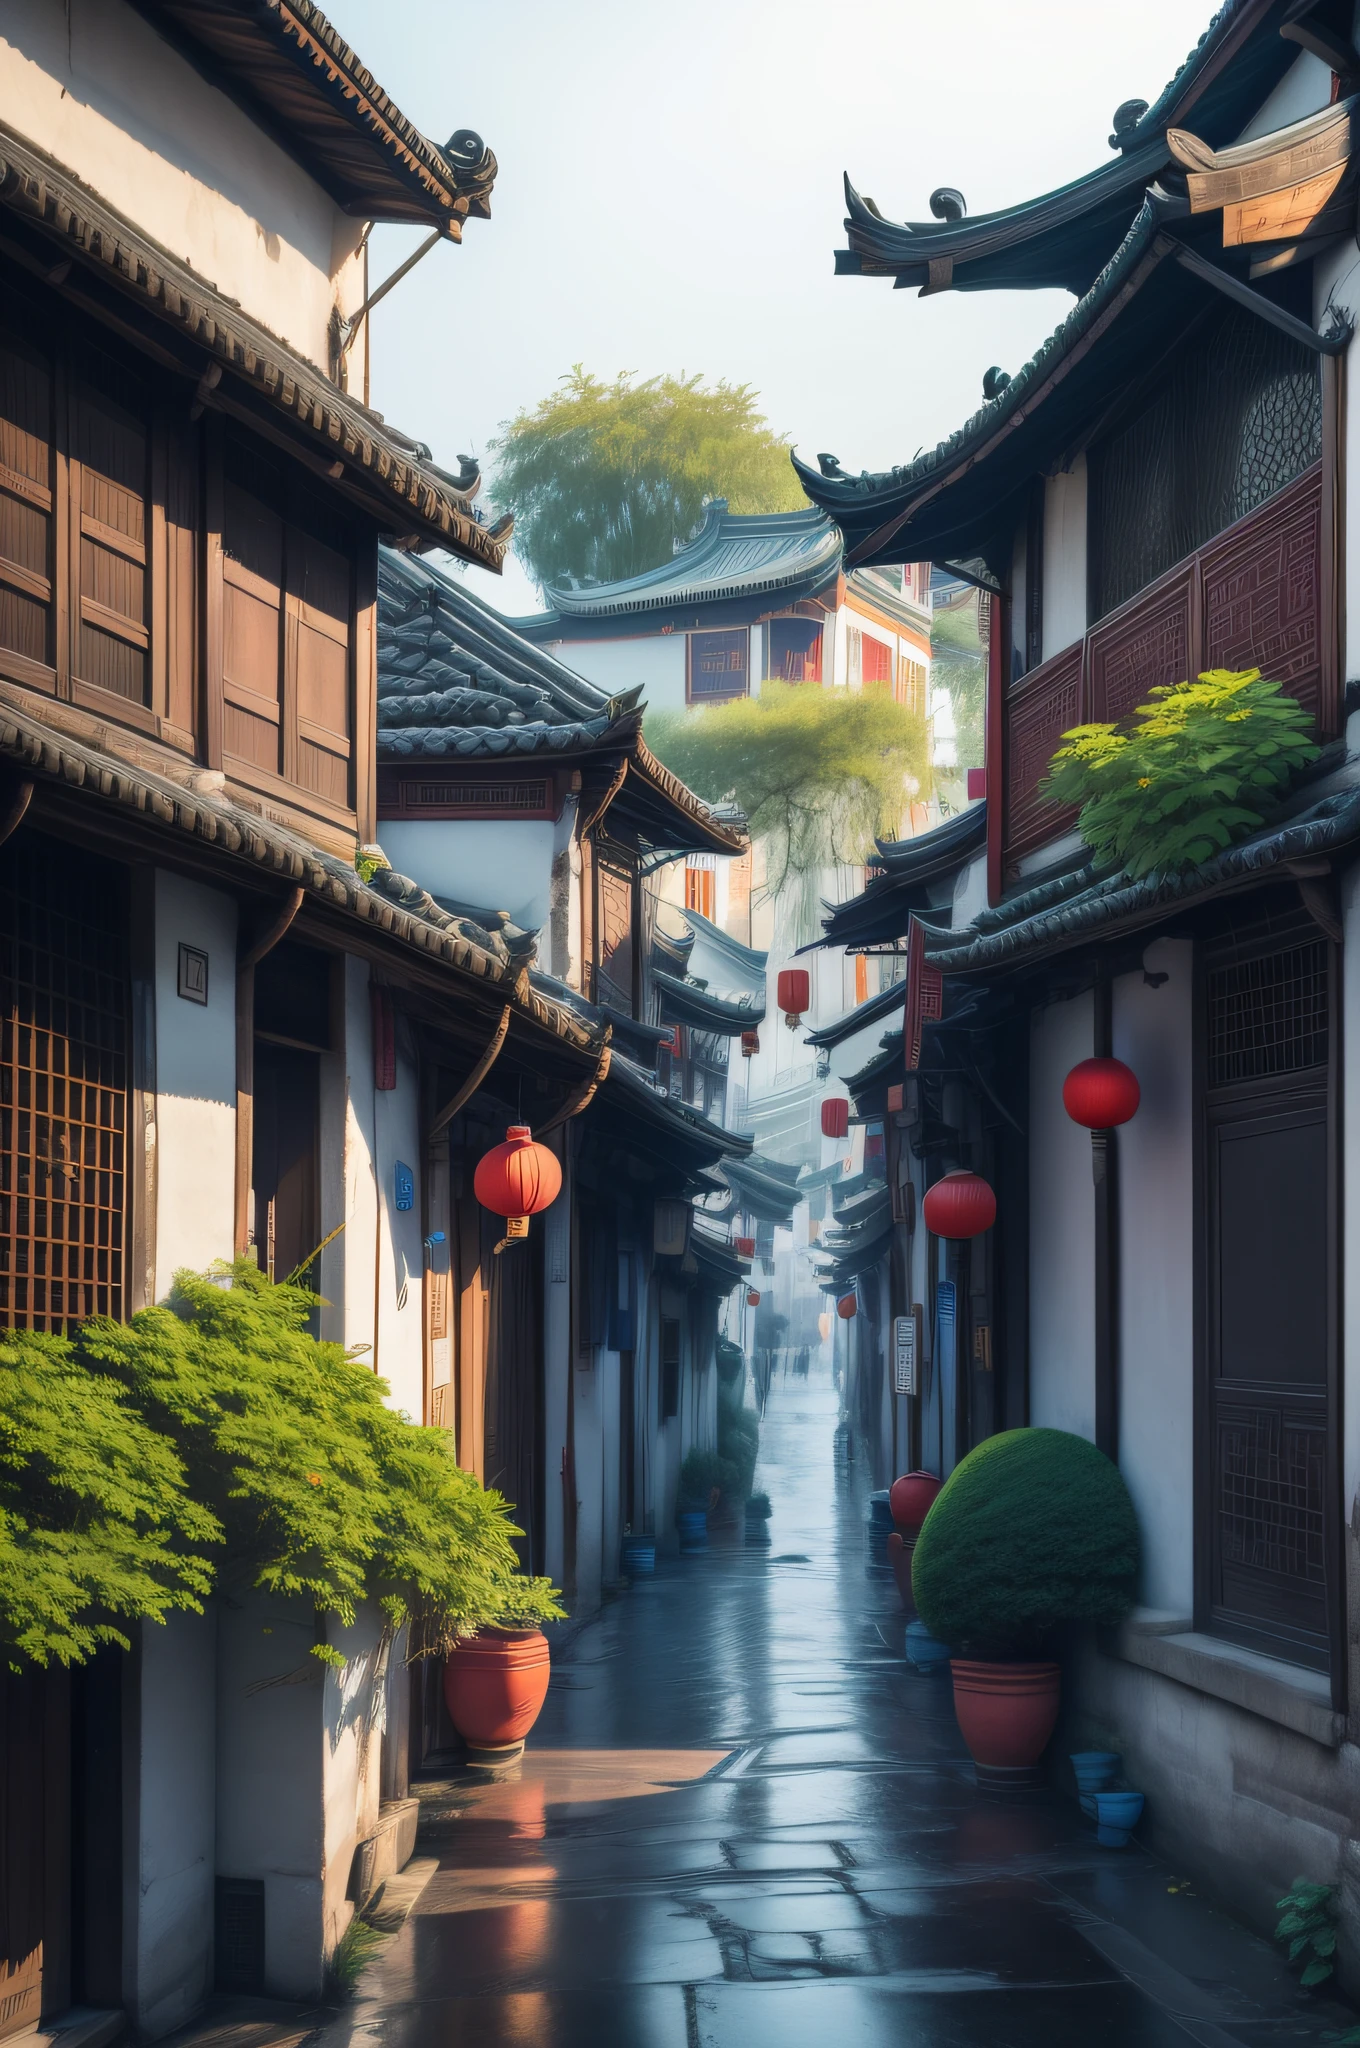 Jiangnan ancient town, the roads on both sides grow flowers, colorful, very beautiful, quiet, ultra-clear picture quality, ultra-high definition, ultra-high resolution, 16k